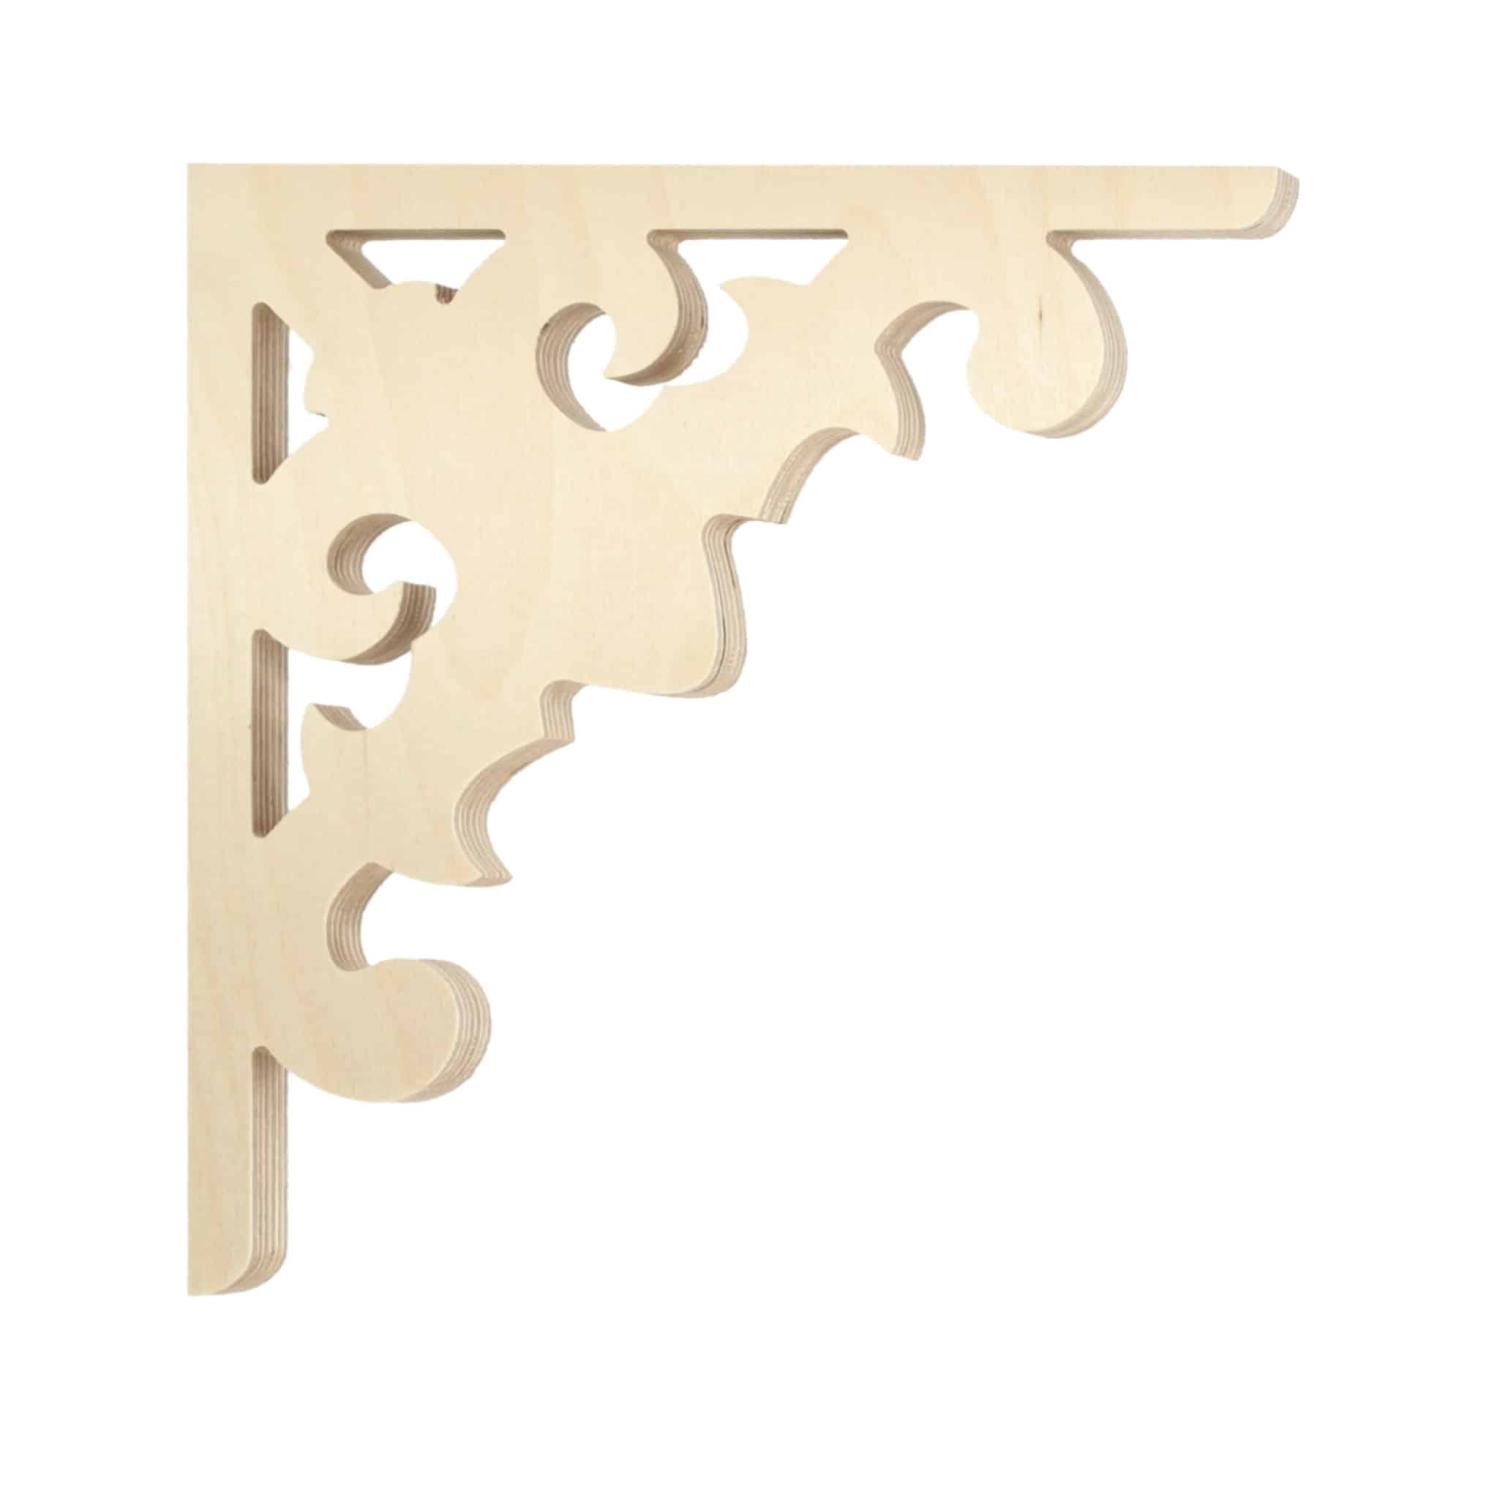 Bracket 090 - Classic wooden gingerbread corbel & bracket in Victorian style and with ornaments for porch, portico and veranda.